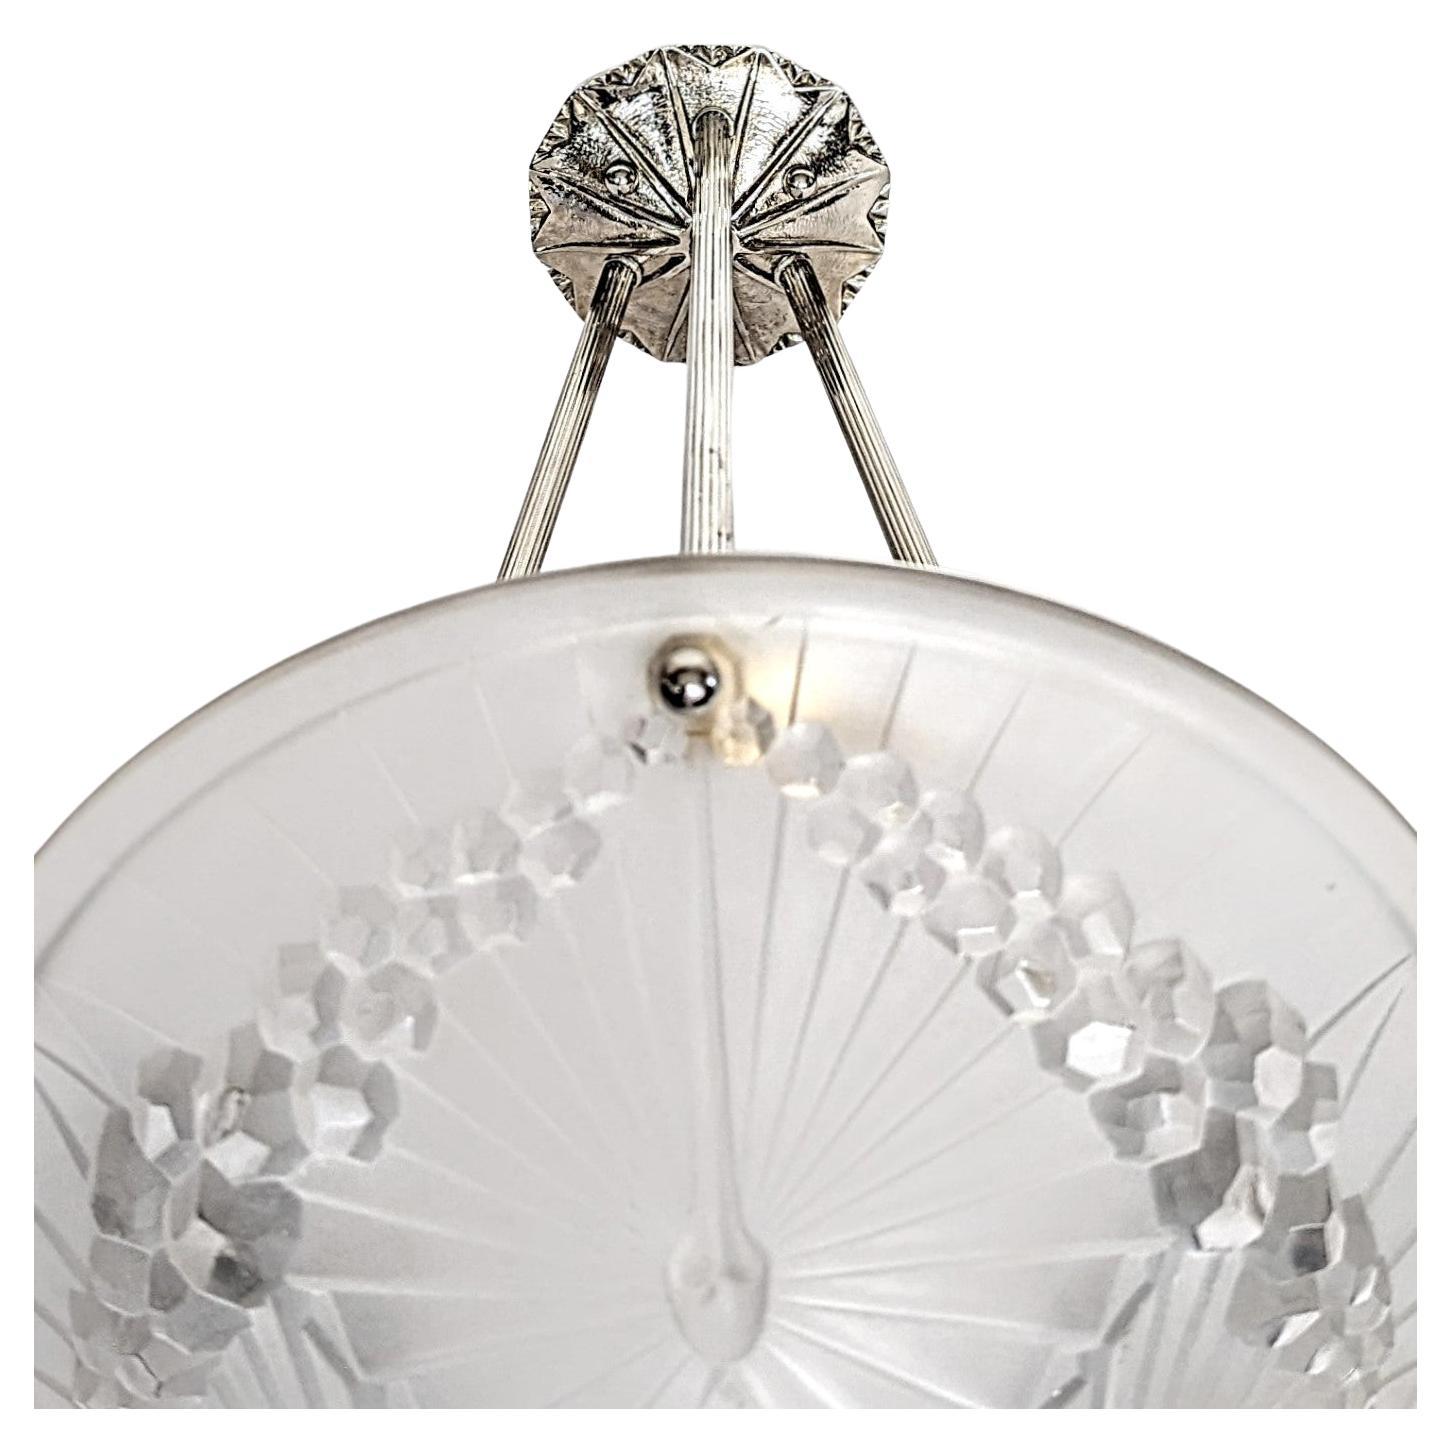 A French Art Deco pendant chandelier by the French artist “Charles Schneider“ in great condition. Clear frosted molded glass shade with intricate flowers and geometric polished motif details are held by three ribbed rods with a matching canopy. The